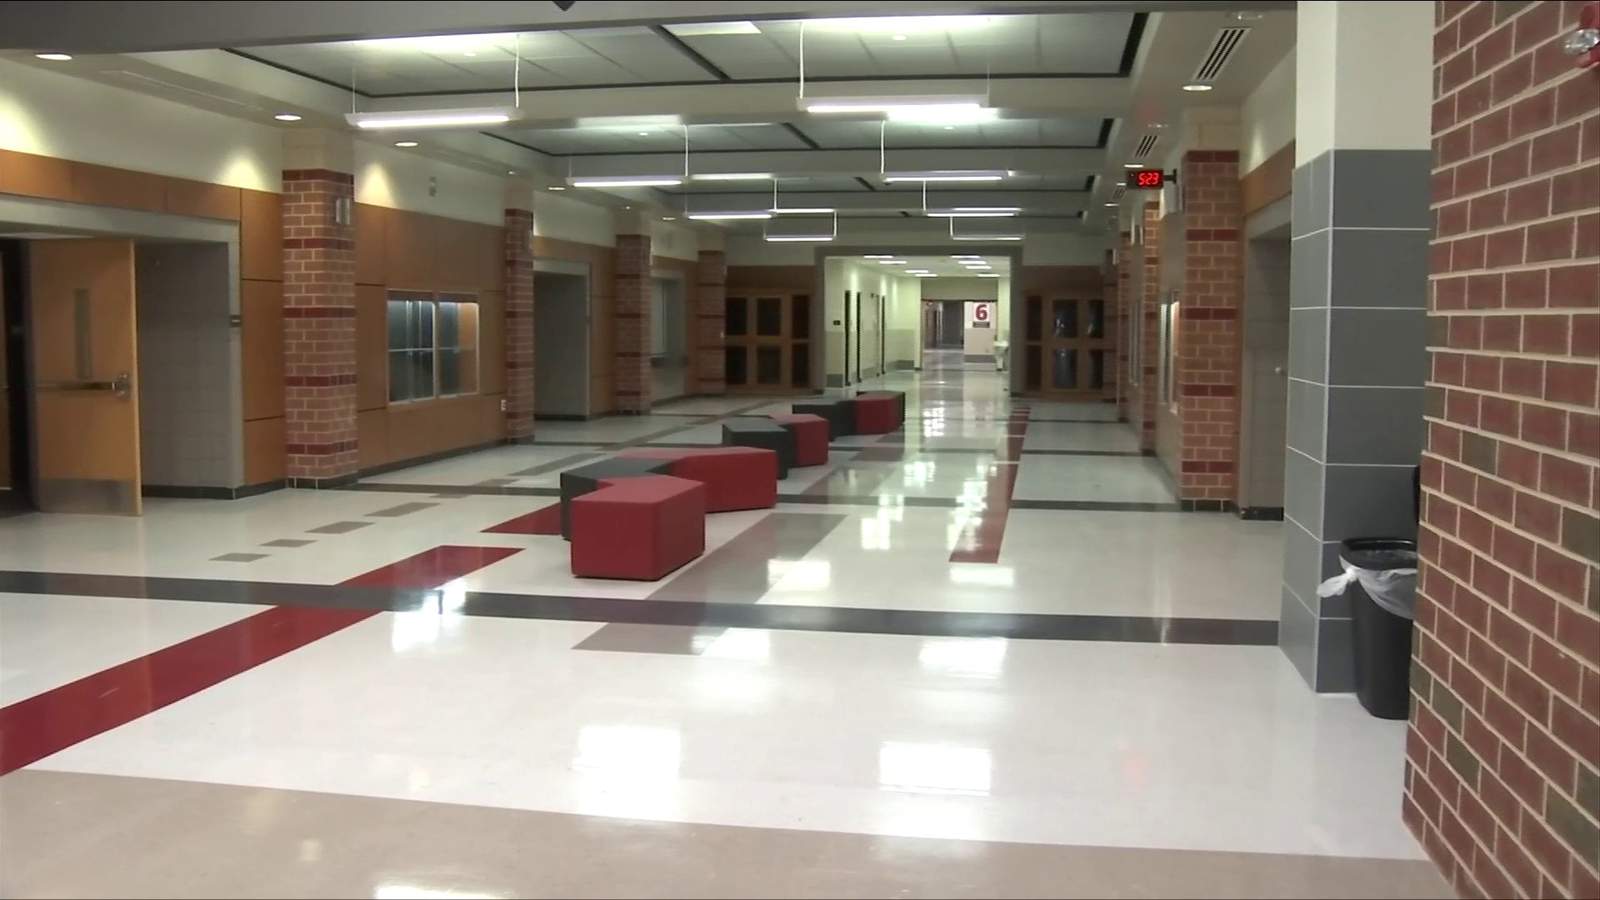 Roanoke County unveils new Cave Spring High School after complete renovation